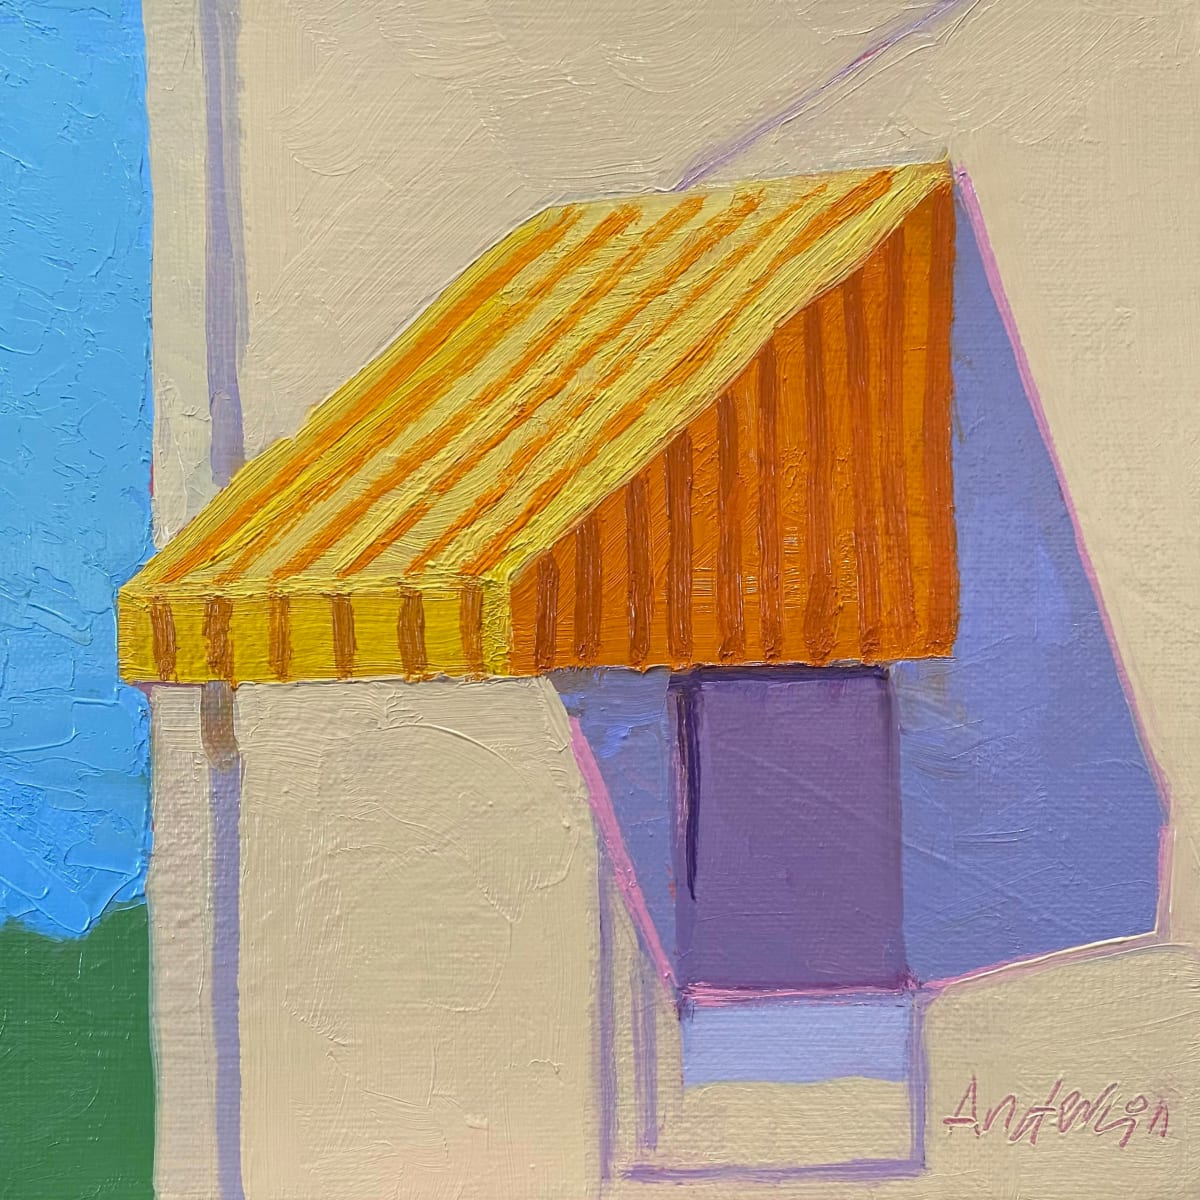 Striped Awning by Michael Anderson 